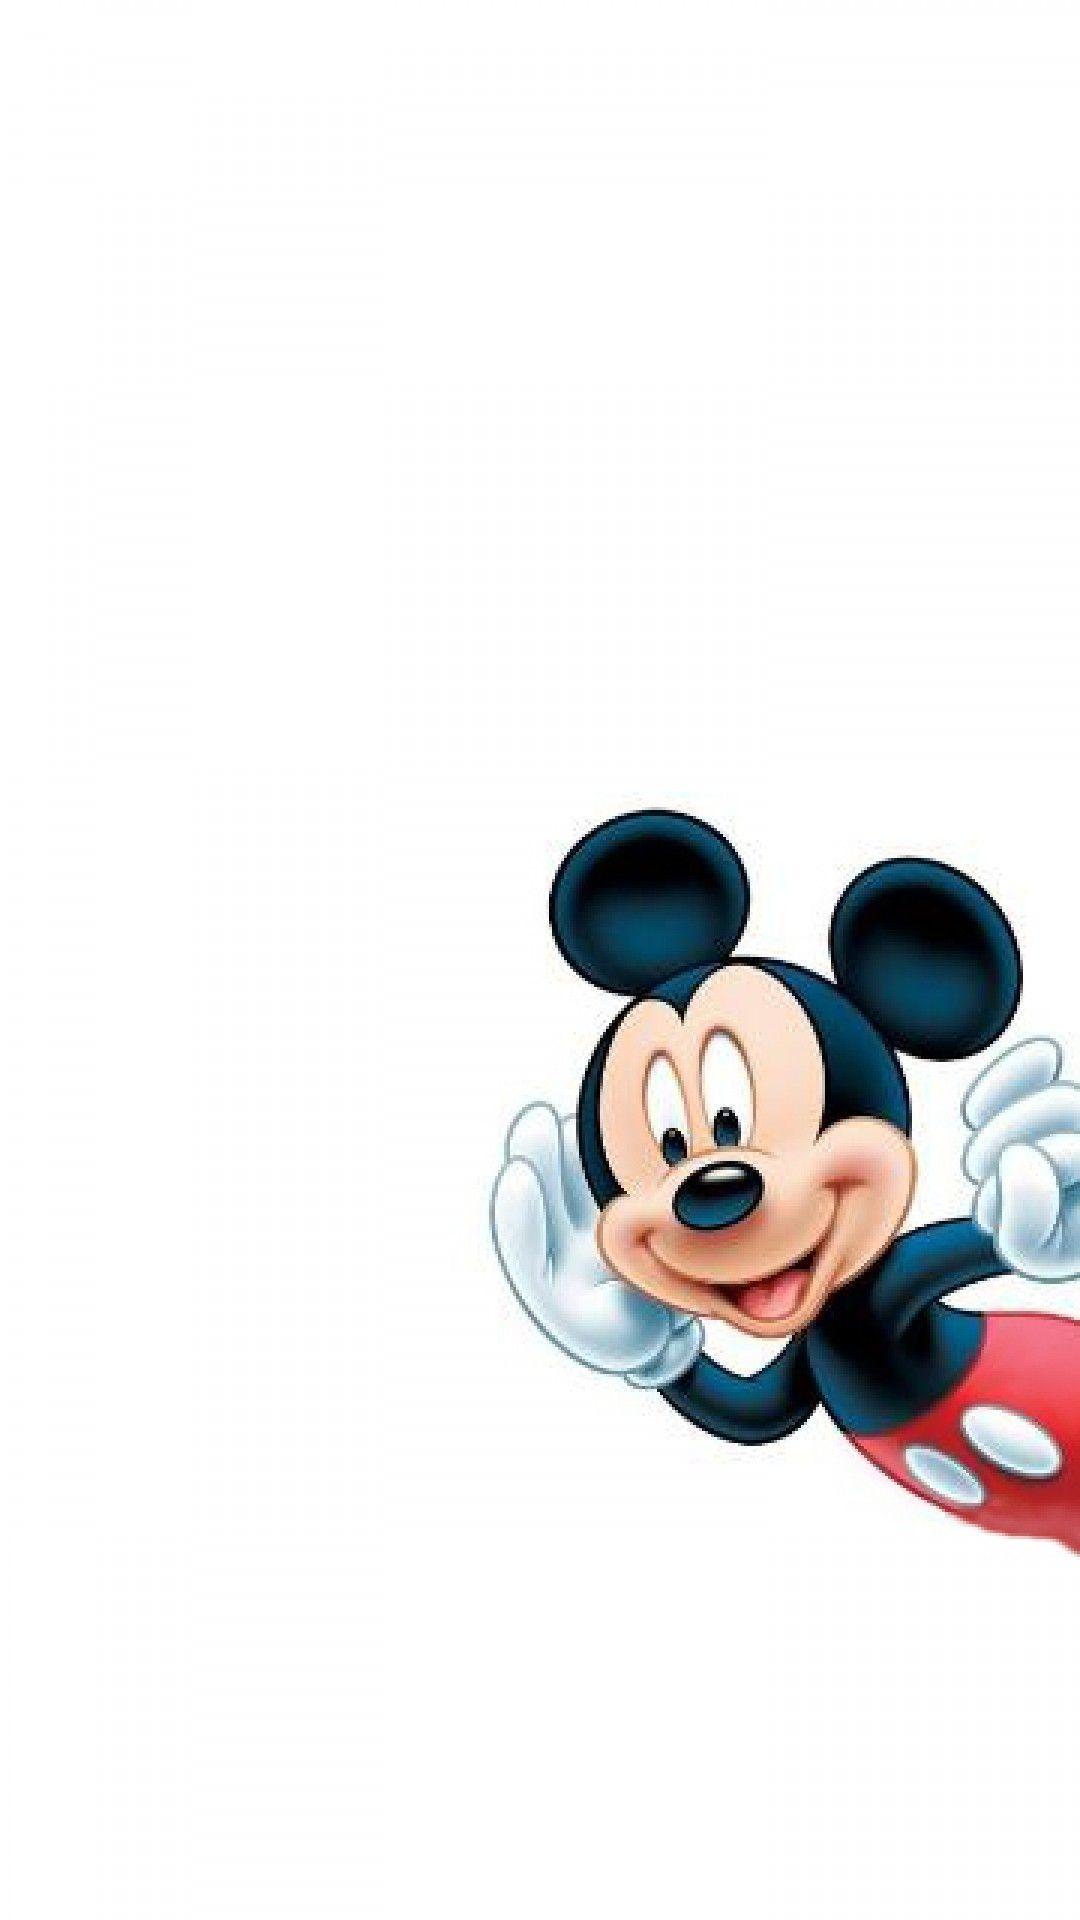 Cute Mickey Mouse Wallpaper Free Cute Mickey Mouse